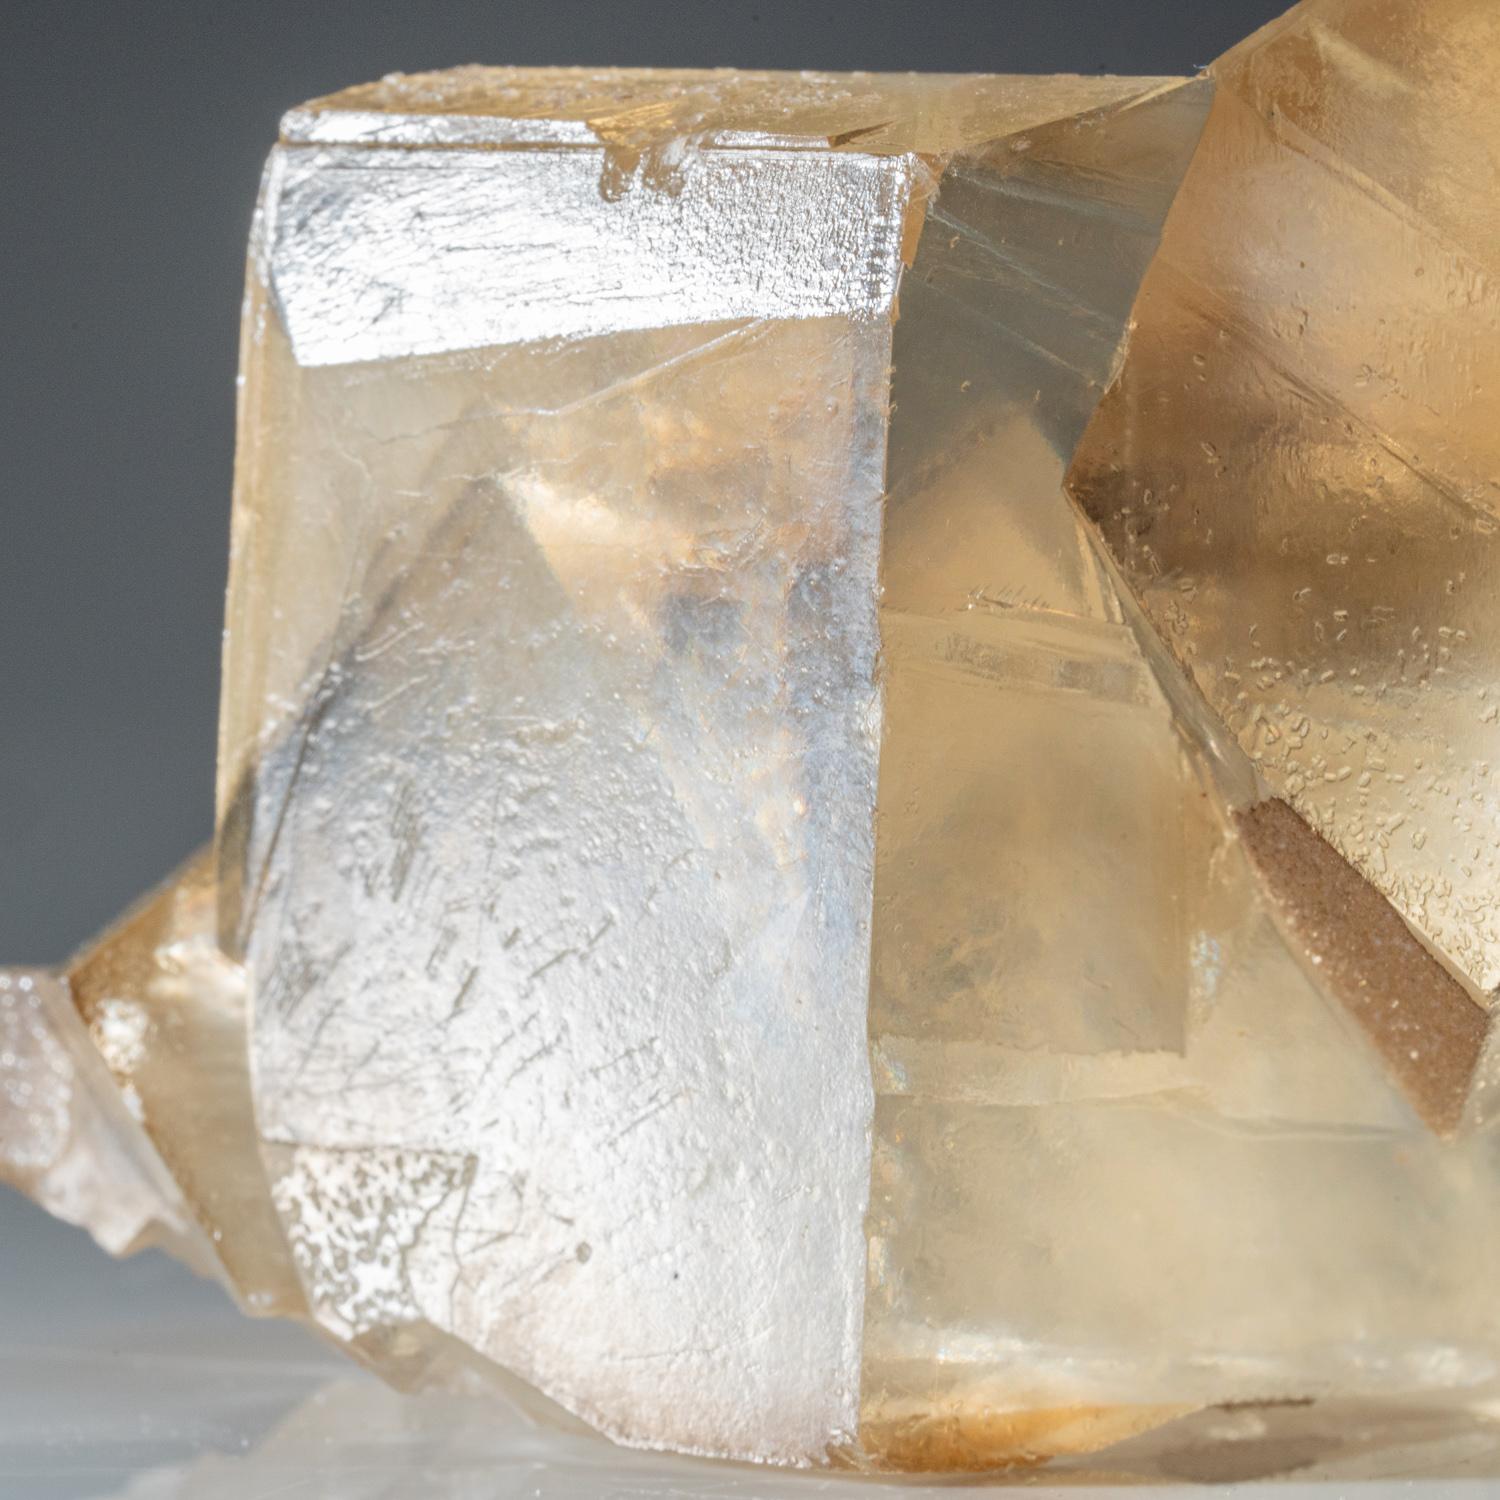 Crystal Twinned Golden Calcite from Nasik District, Maharashtra, India